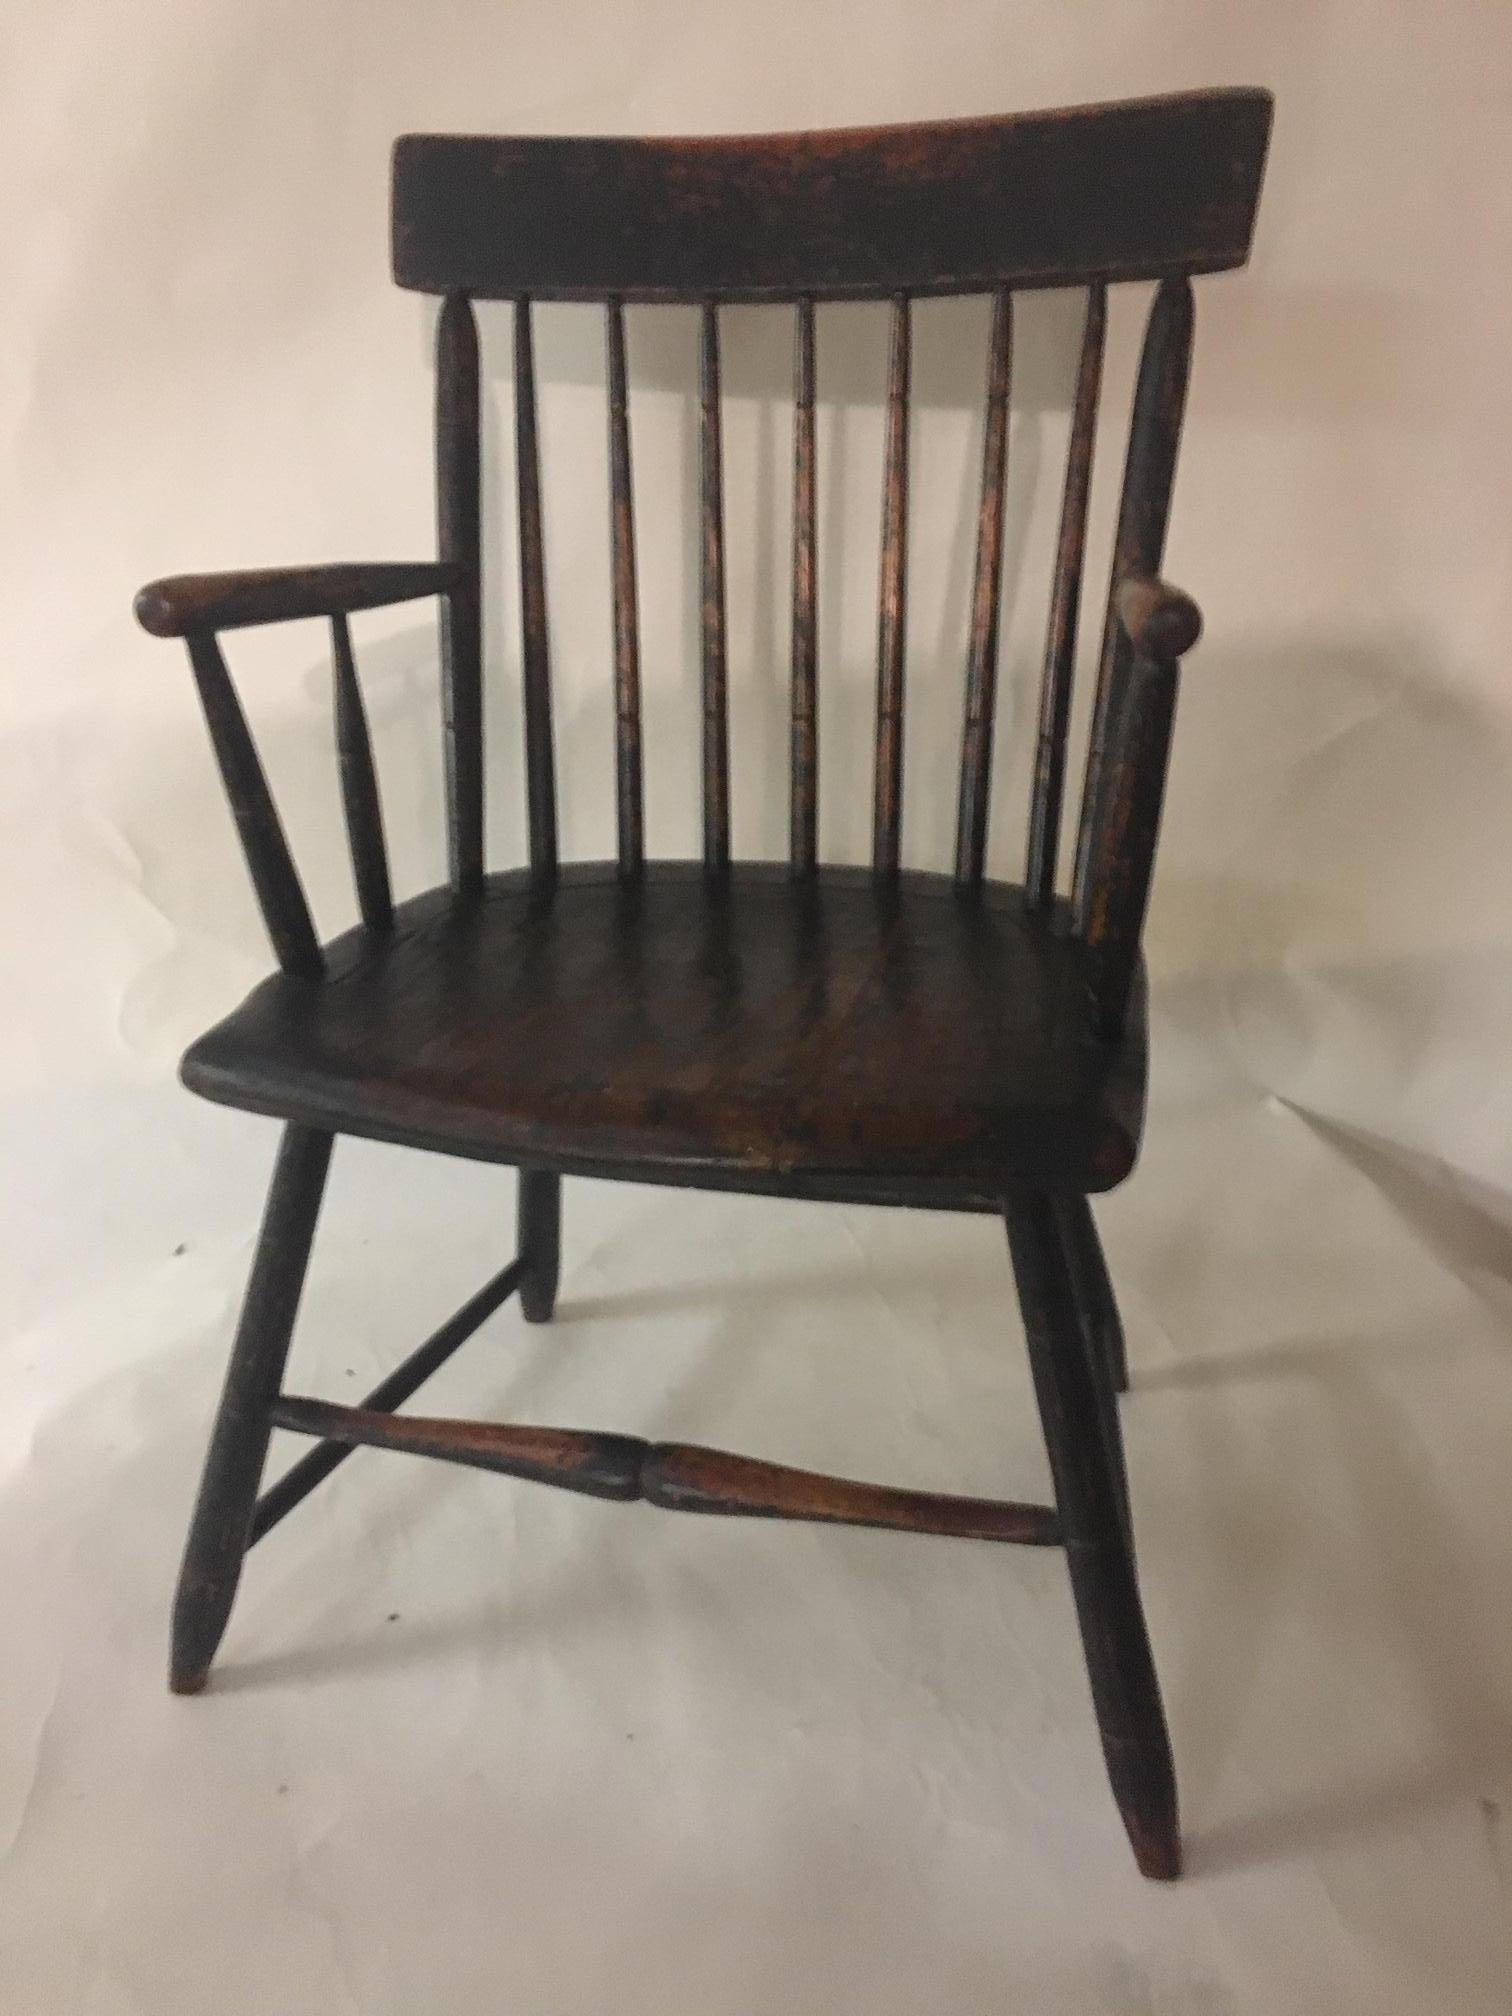 19th Century Windsor Armchair in Petite Size with Original Milk Paint 1